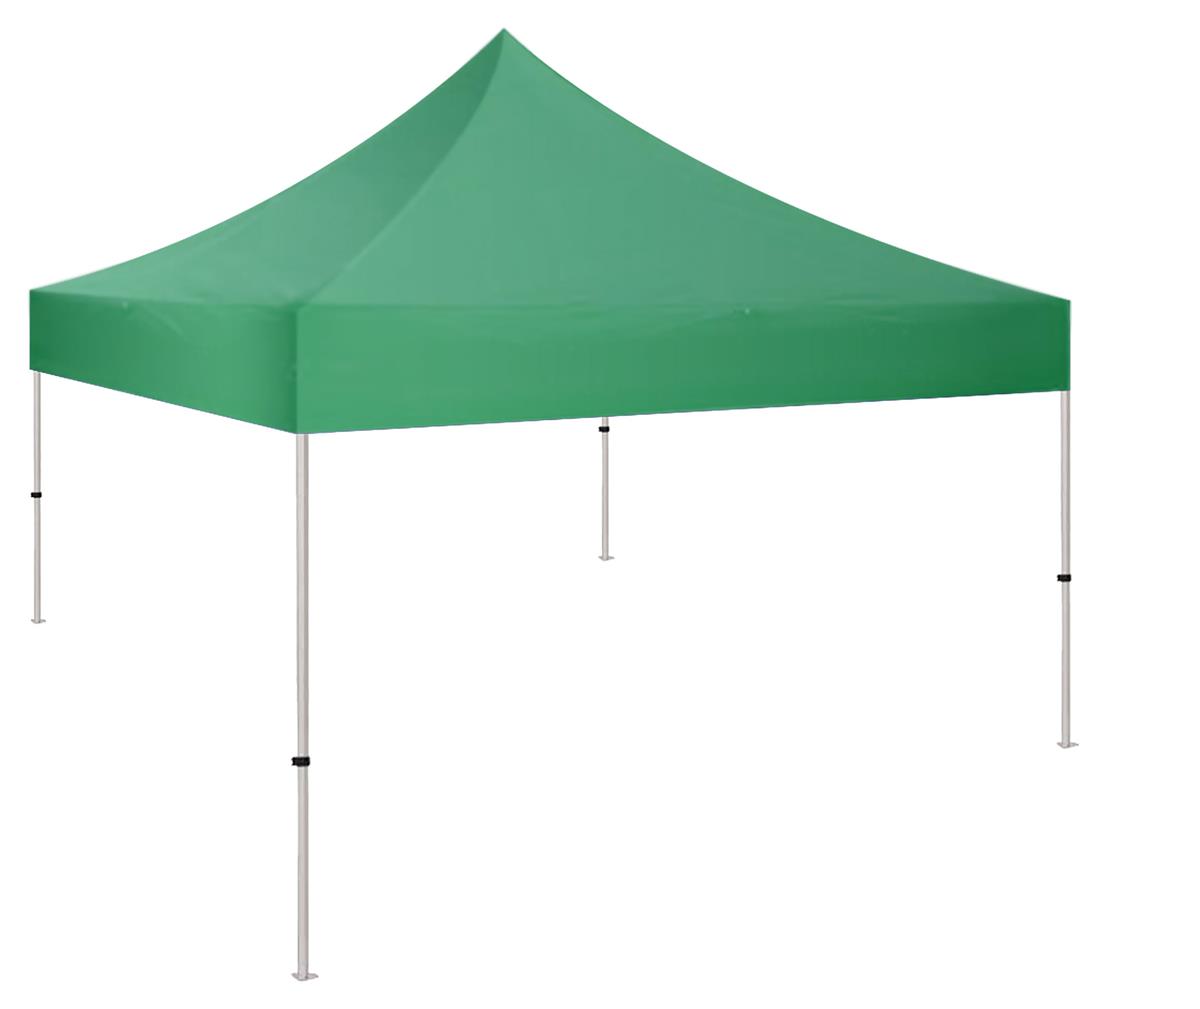 10x10 pop up canopy tent with green polyester material